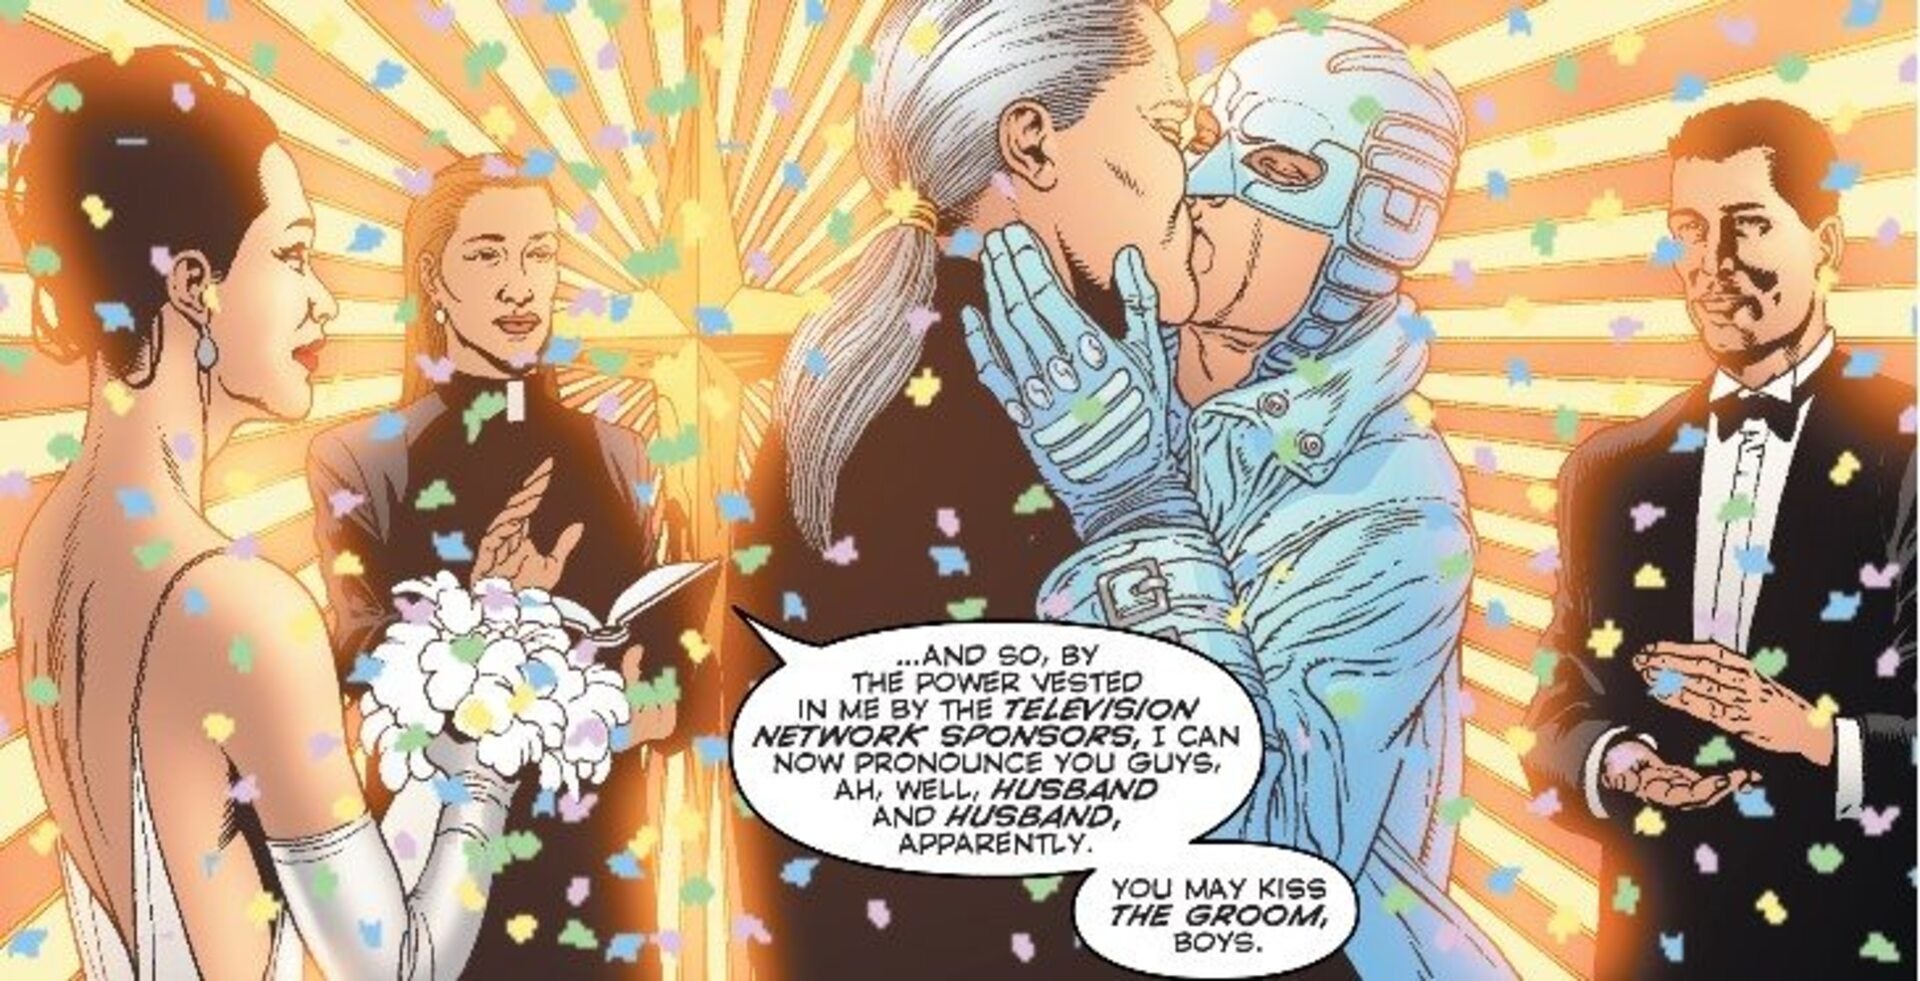 Panel of Midnighter and Apollo kissing at their wedding